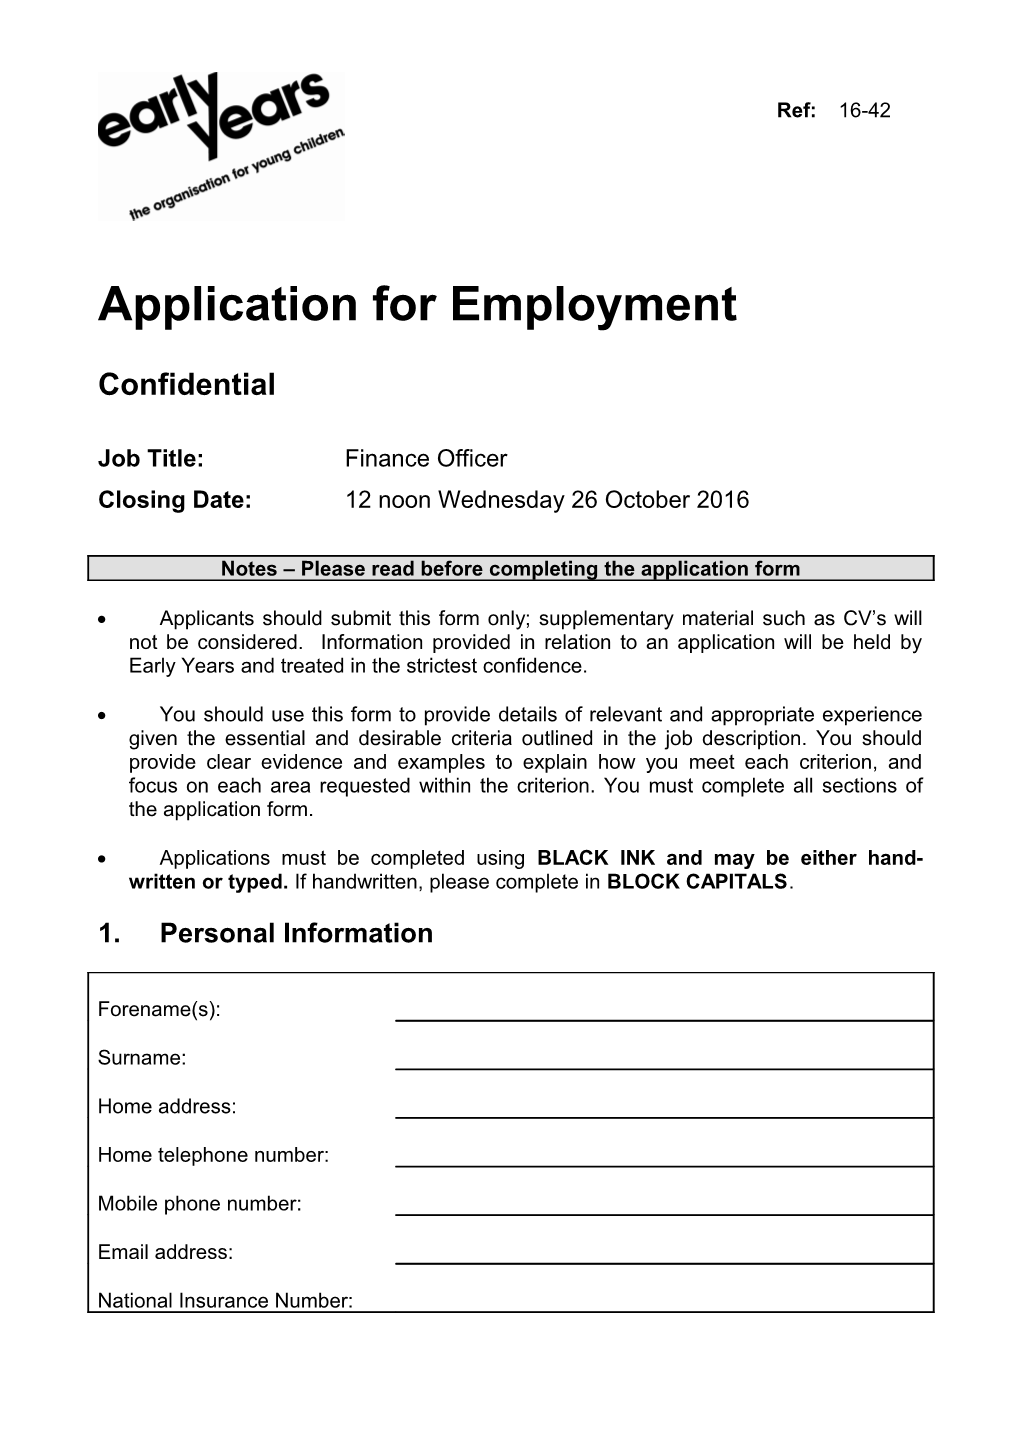 Application for Employment s99